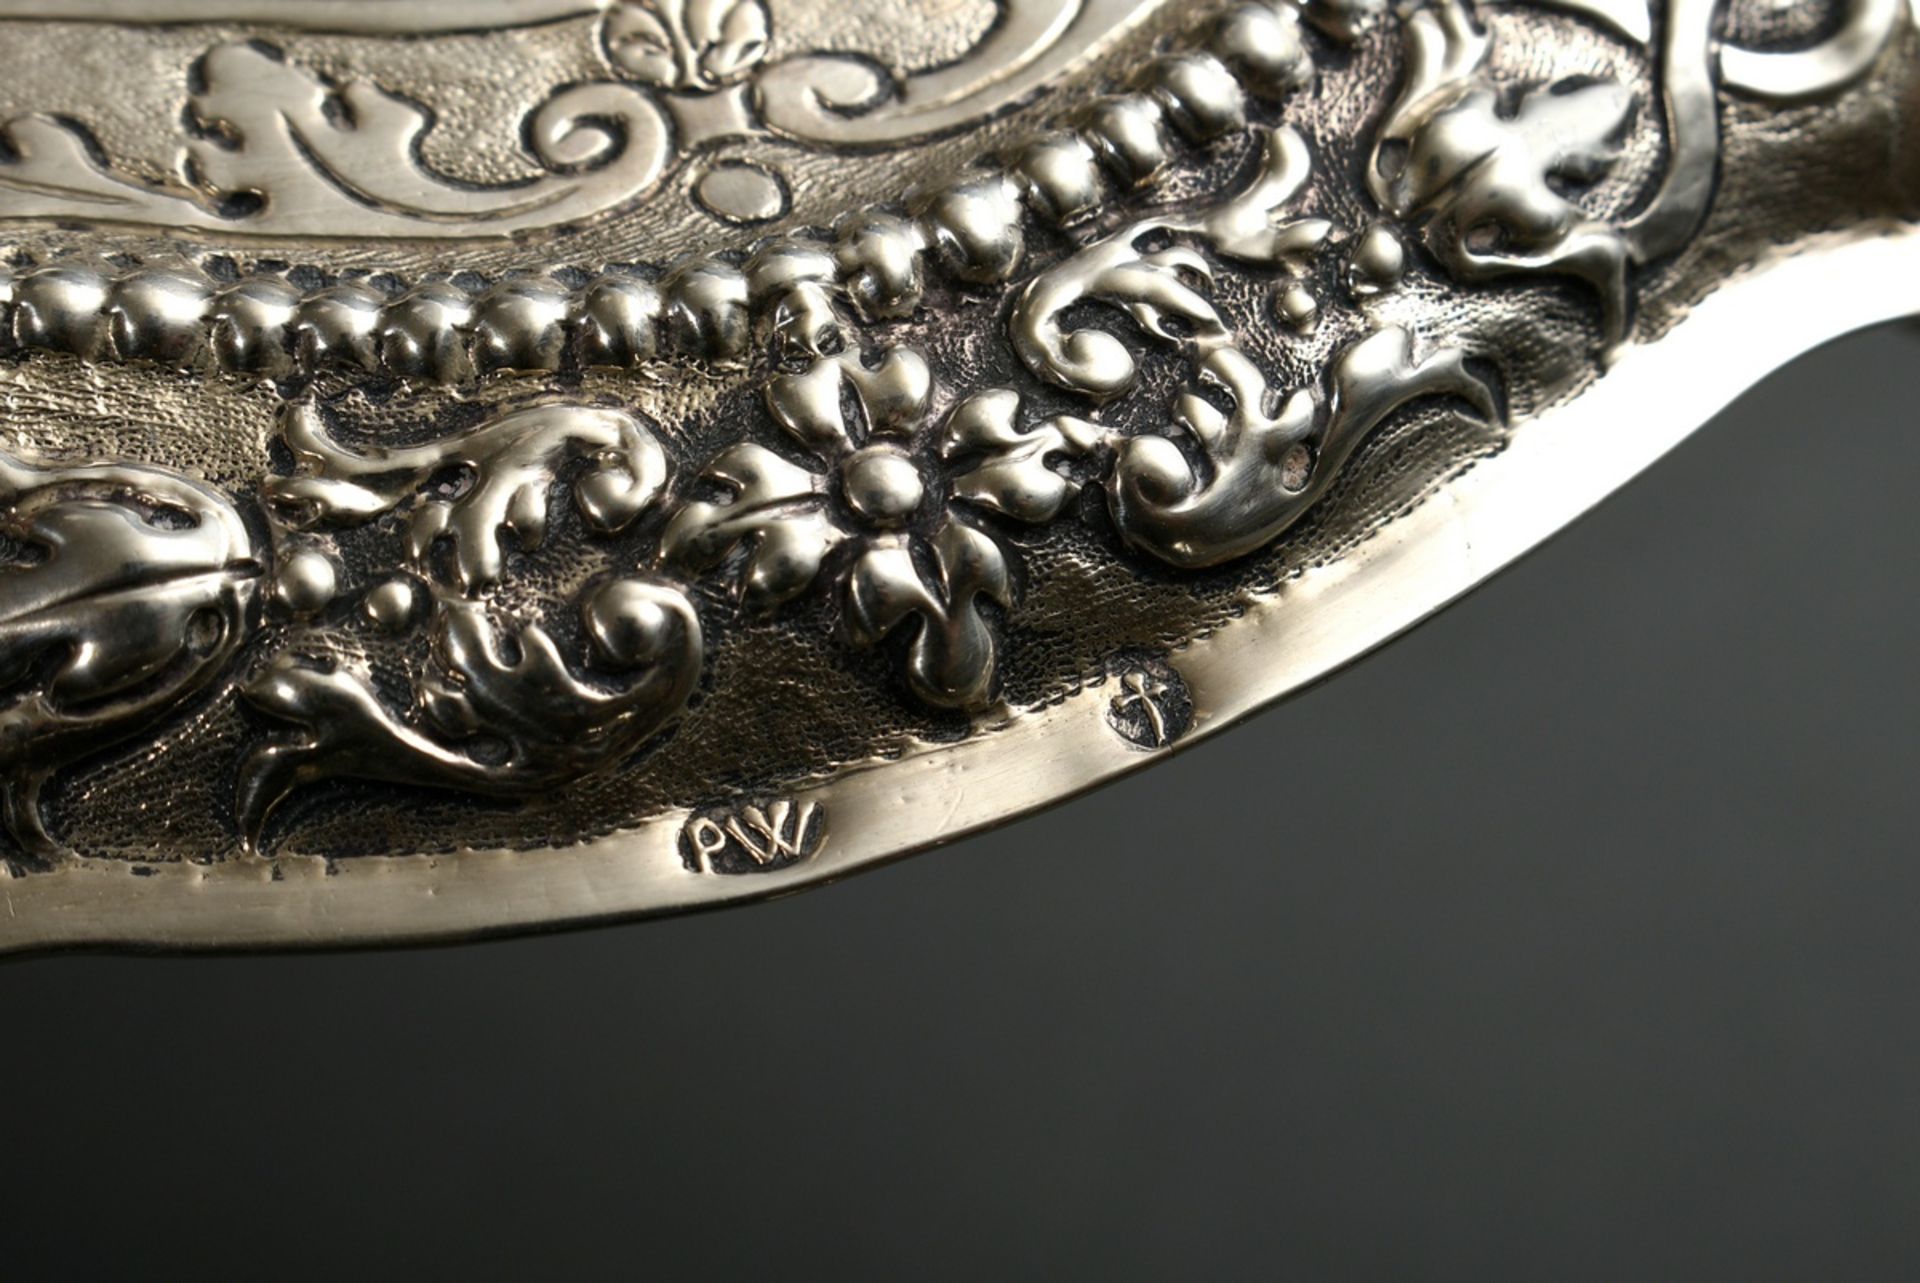 Oval Régence presentoir with richly decorated rim on paw feet, c. 1720, MM: ‘PW’, silver, 159g, 13x - Image 3 of 3